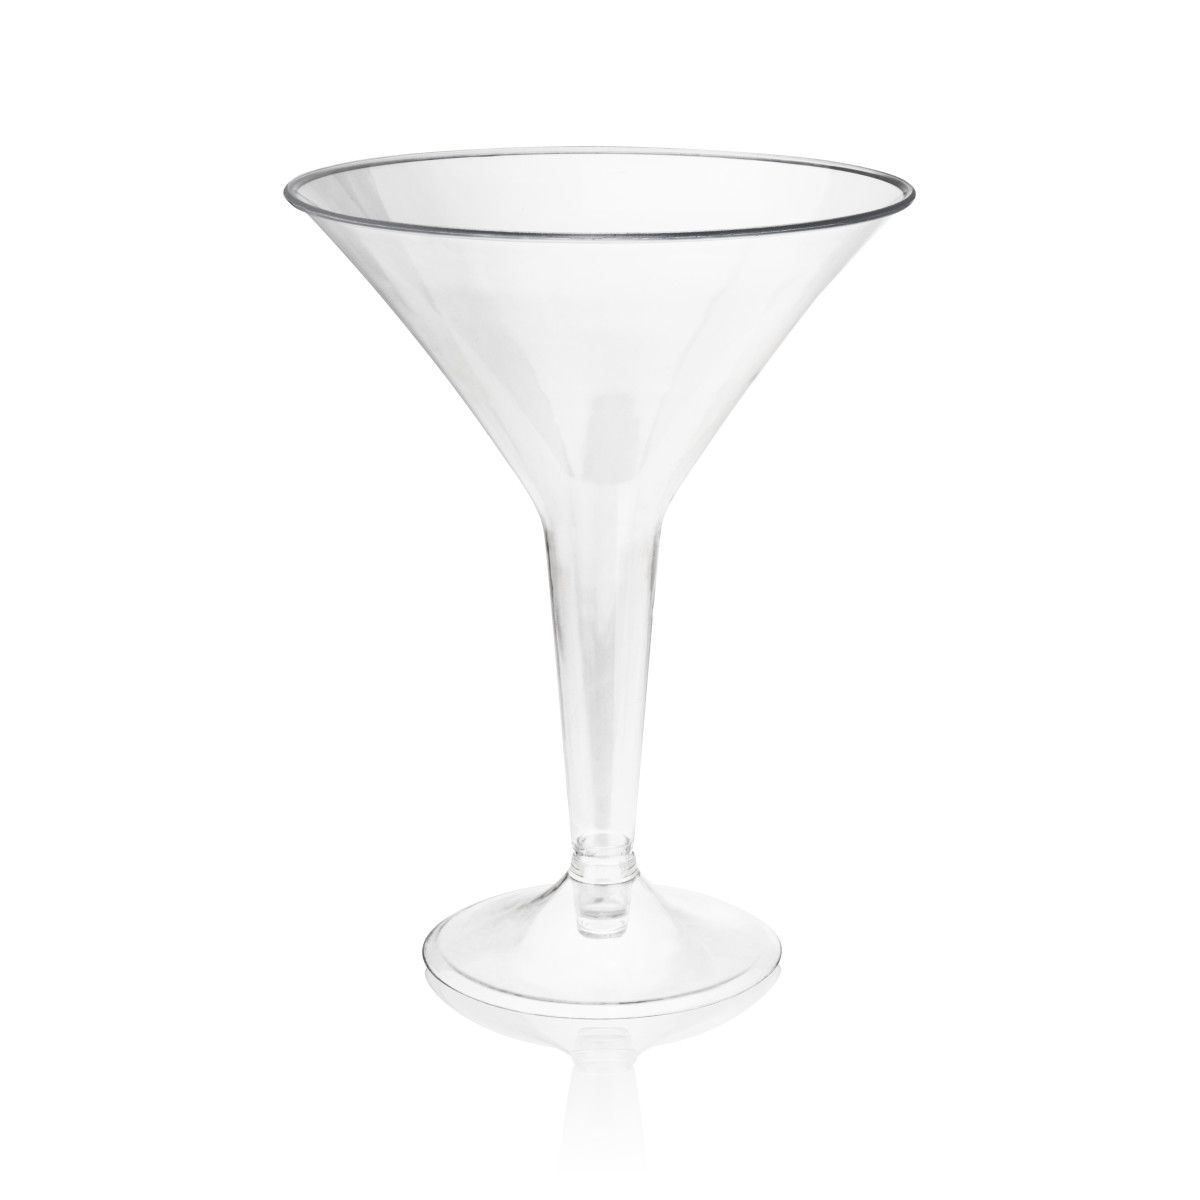 Libbey Midtown Martini Glasses, 12-ounce, Set of 4 